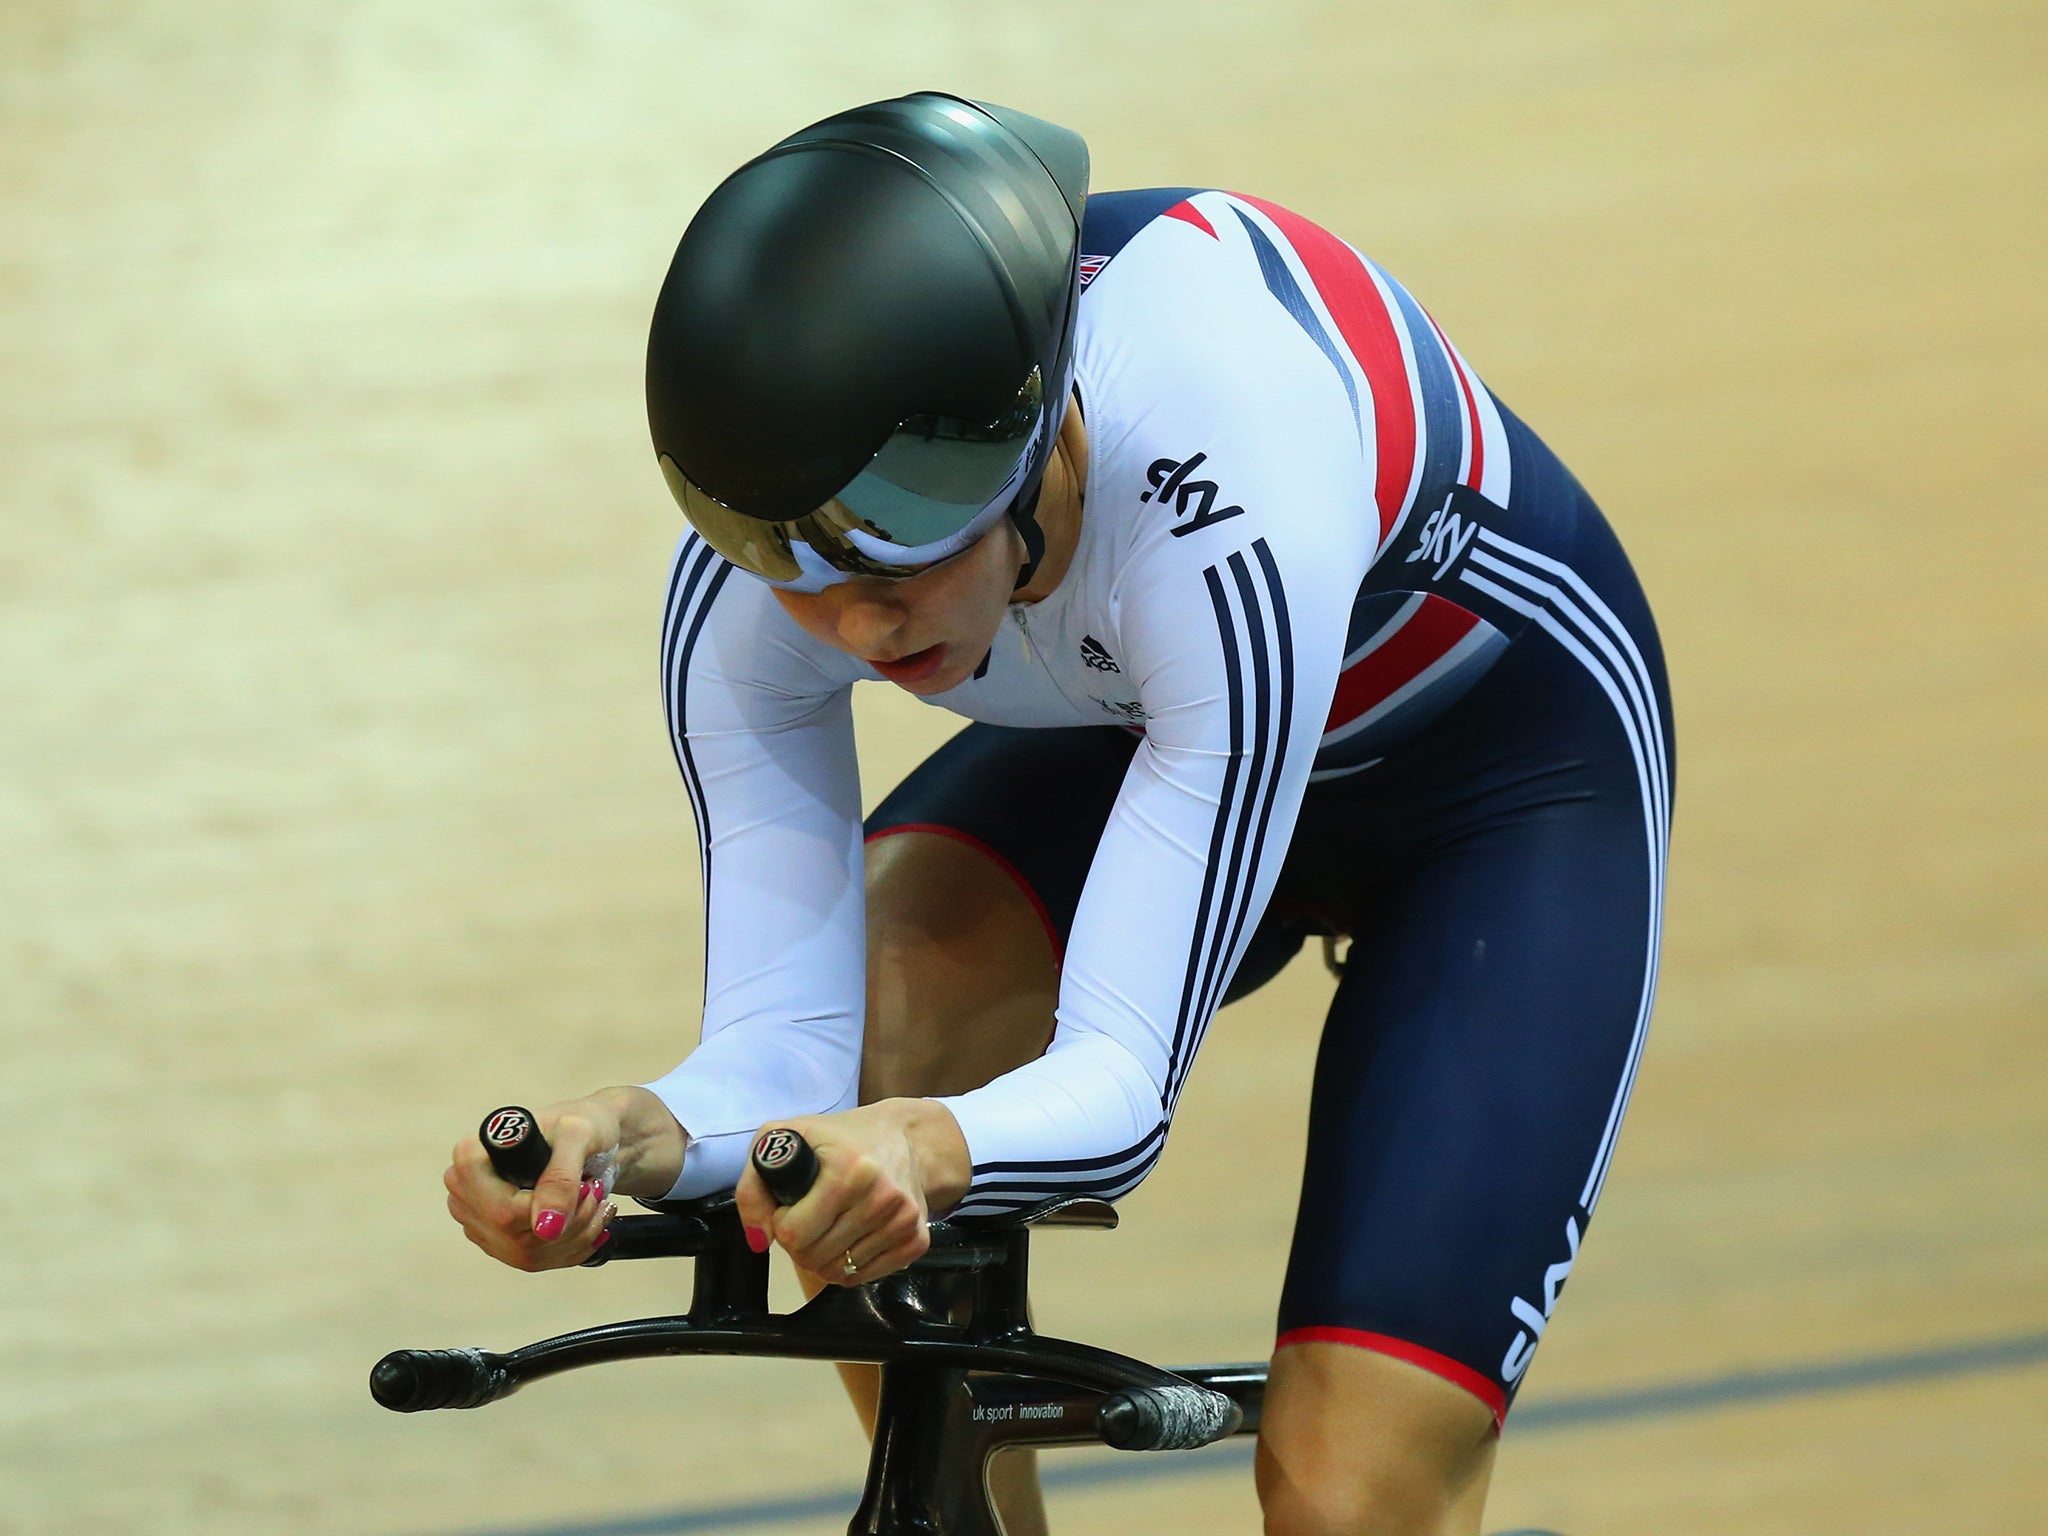 Jo Rowsell finished fourth in the individual pursuit